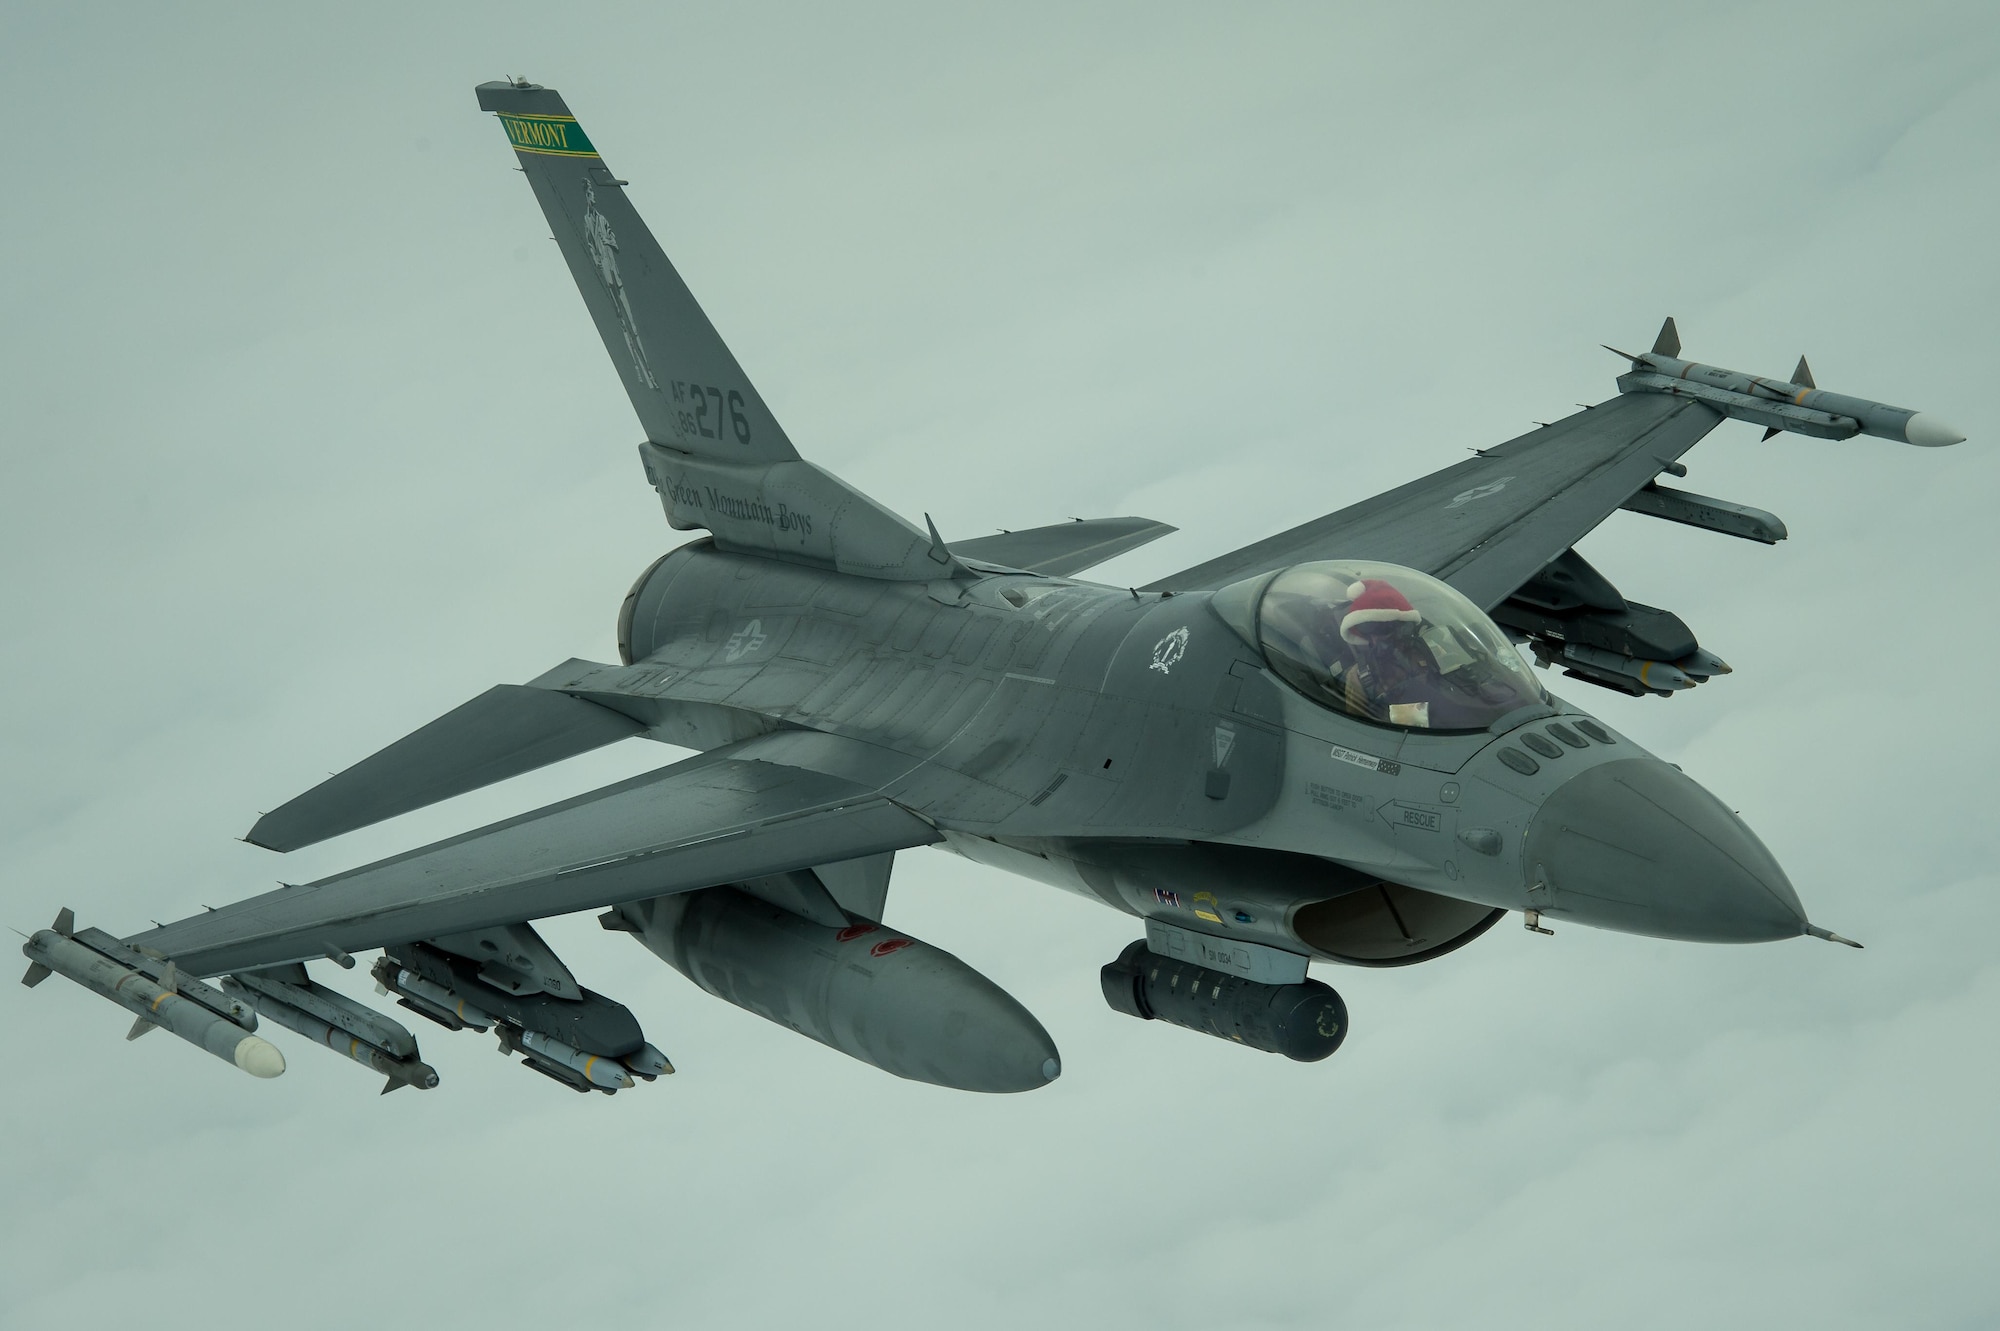 An F-16 Fighting Falcon disconnects from a KC-10 Extender after a successful refueling over Iraq, Dec. 25, 2016. Many pilots wore a traditional red “Santa” hat while flying on Christmas Day. F-16s are providing precision guided close air support during Combined Joint Task Force-Operation Inherent Resolve, a multinational effort to weaken and destroy Islamic State in Iraq and the Levant operations in the Middle East region and around the world. (U.S. Air Force photo | Senior Airman Tyler Woodward)